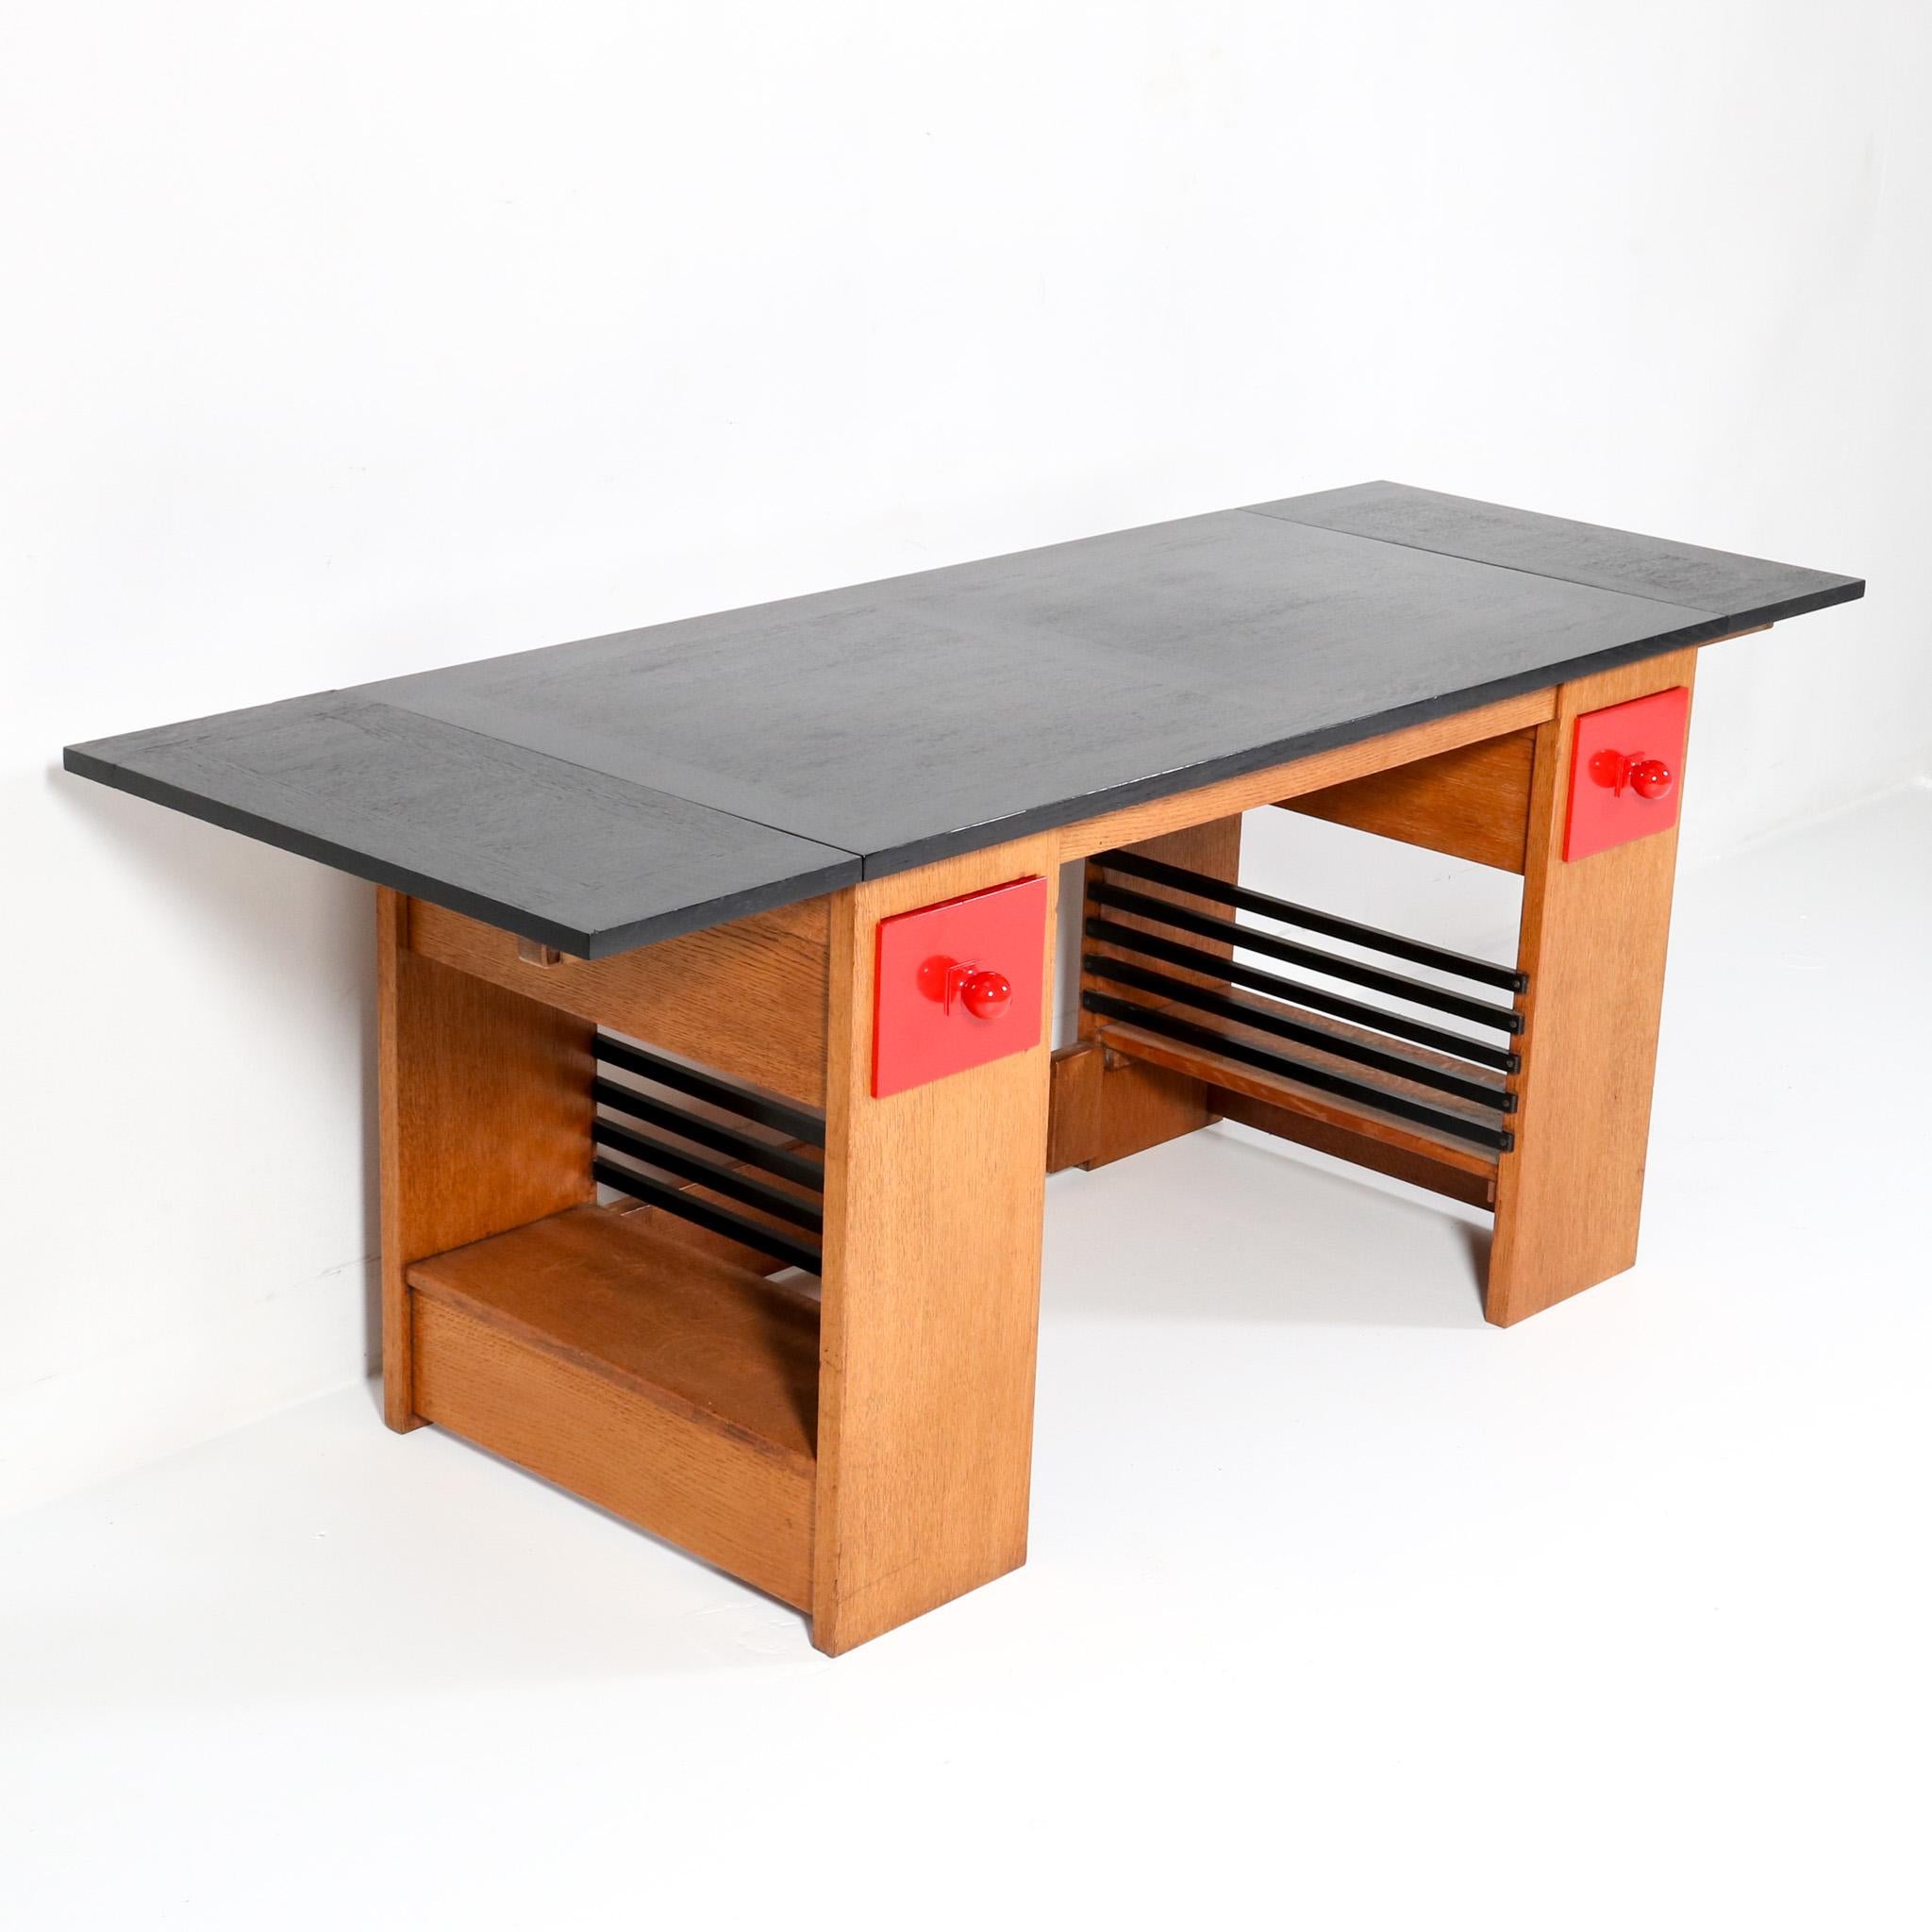  Art Deco Modernist Desk or Writing Table by Hendrik Wouda for Pander, 1920s For Sale 2